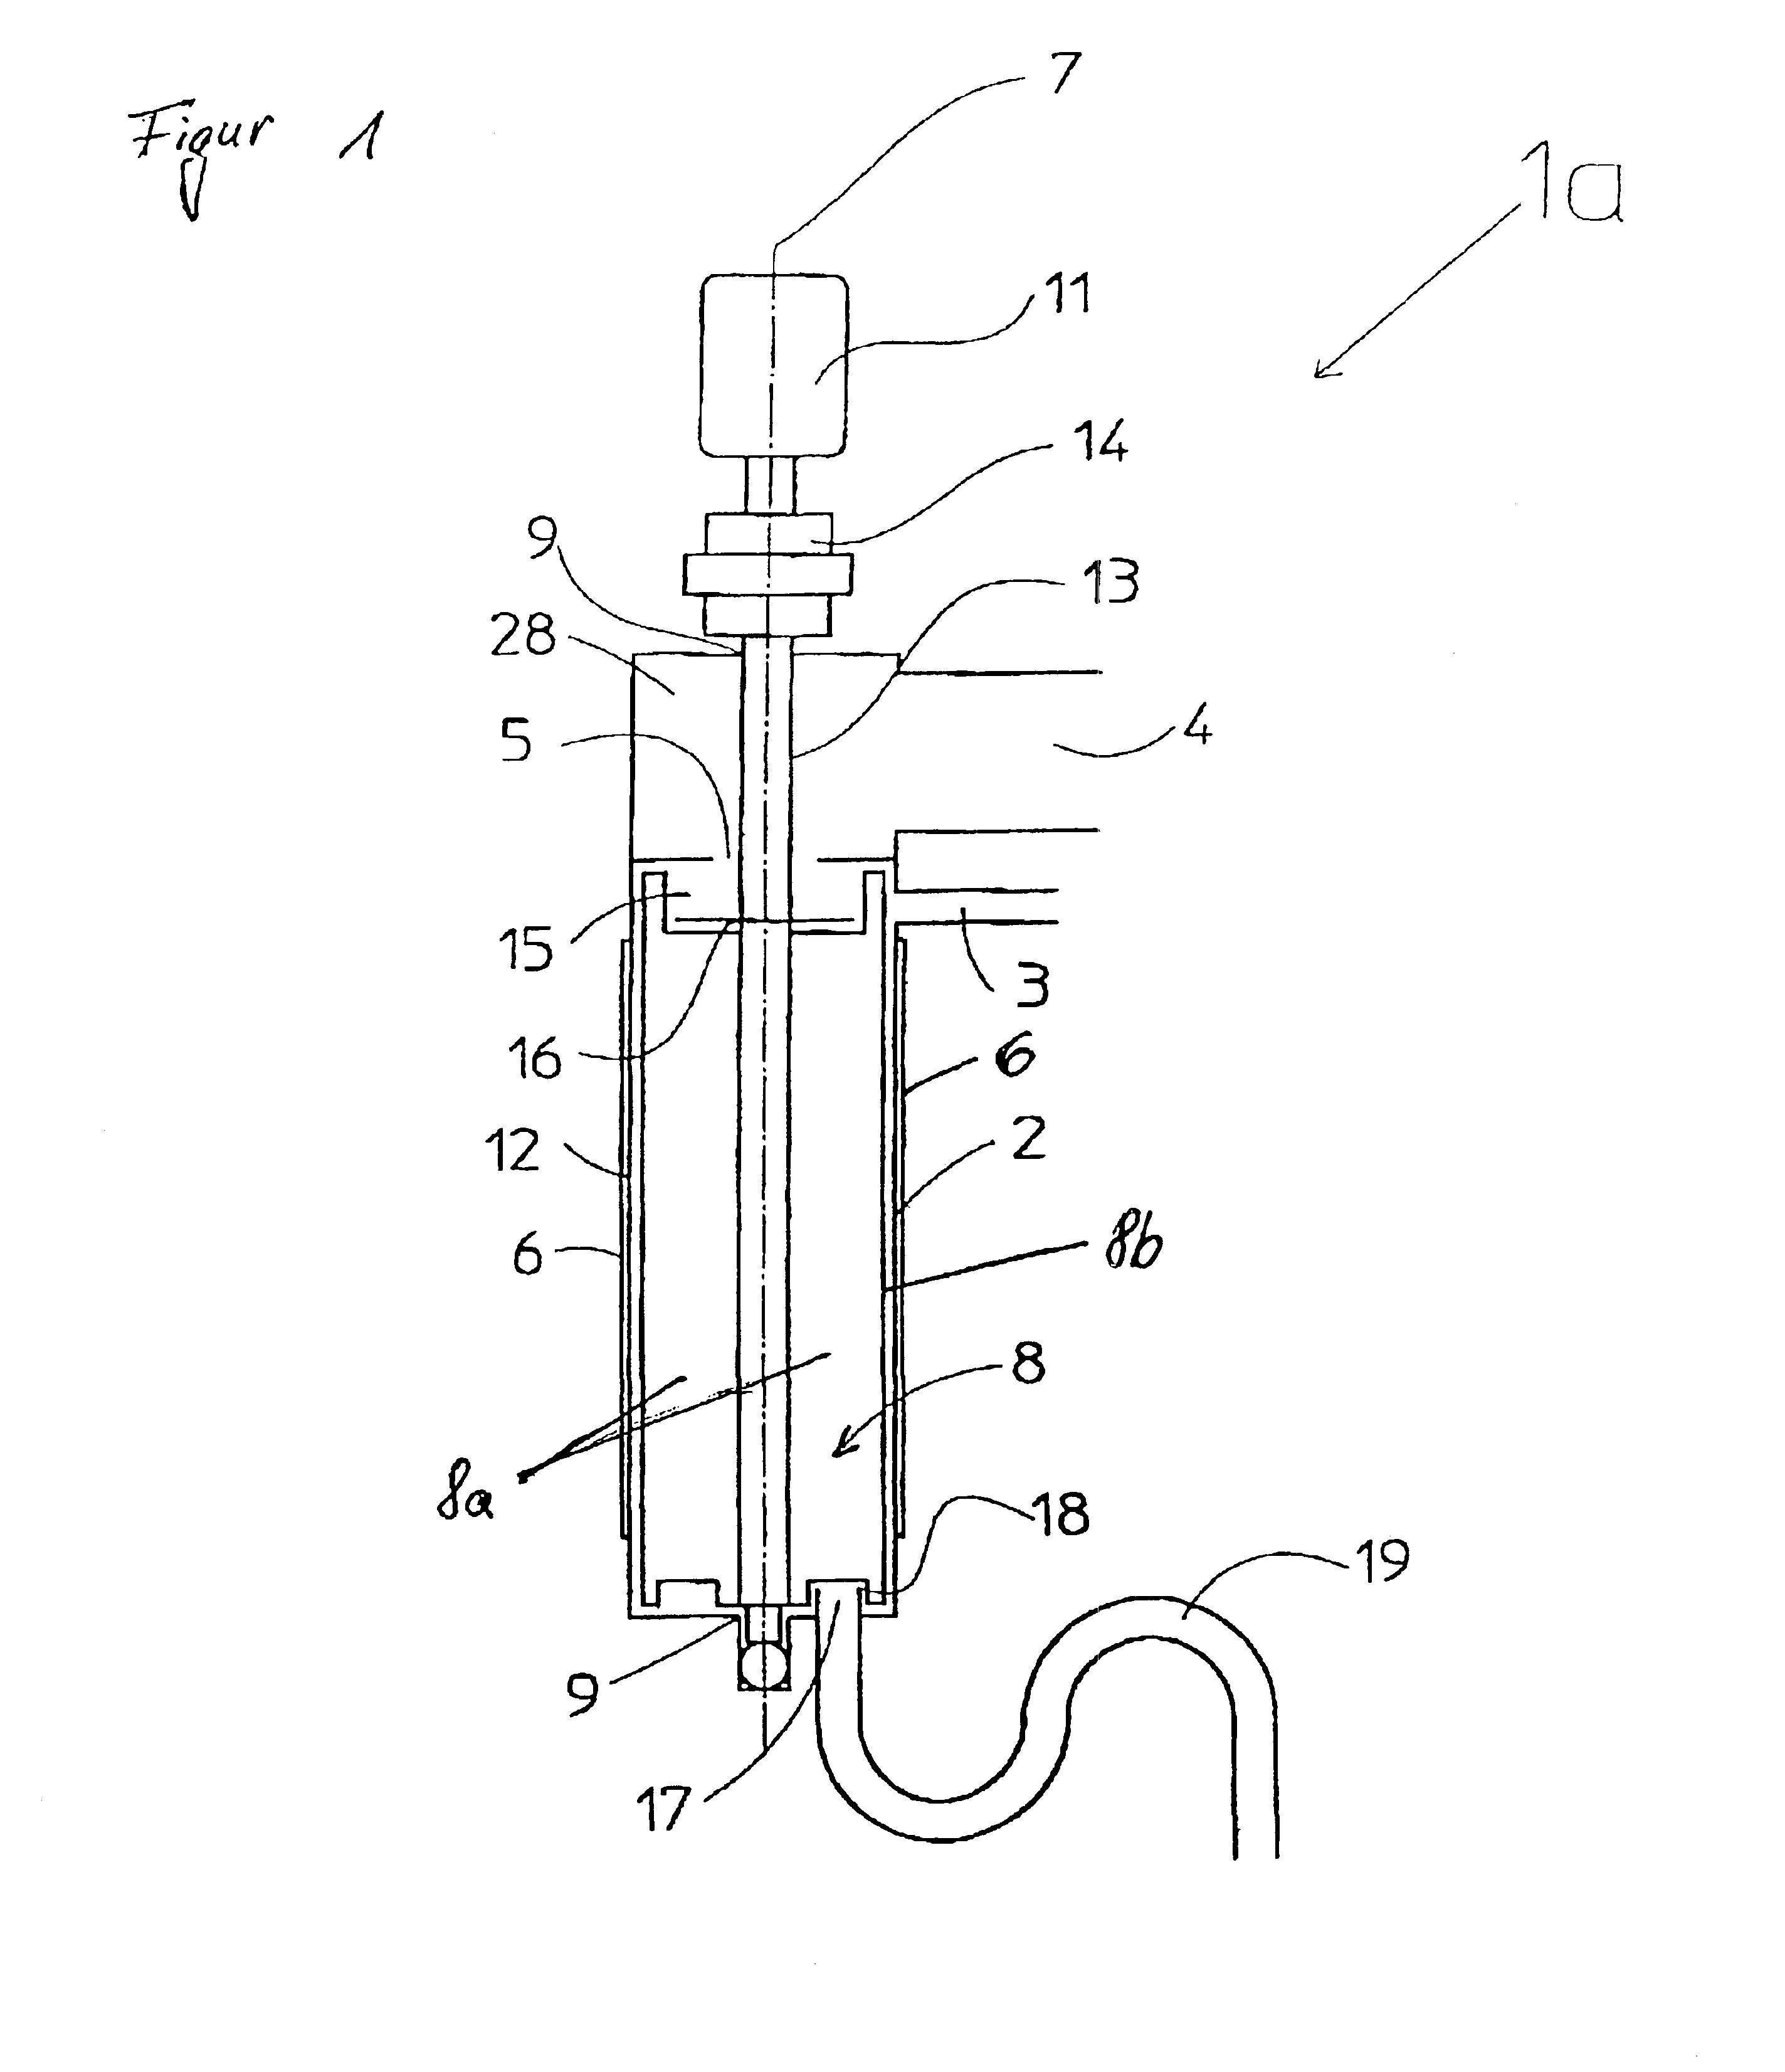 Method and apparatus for generating steam for a cooking device